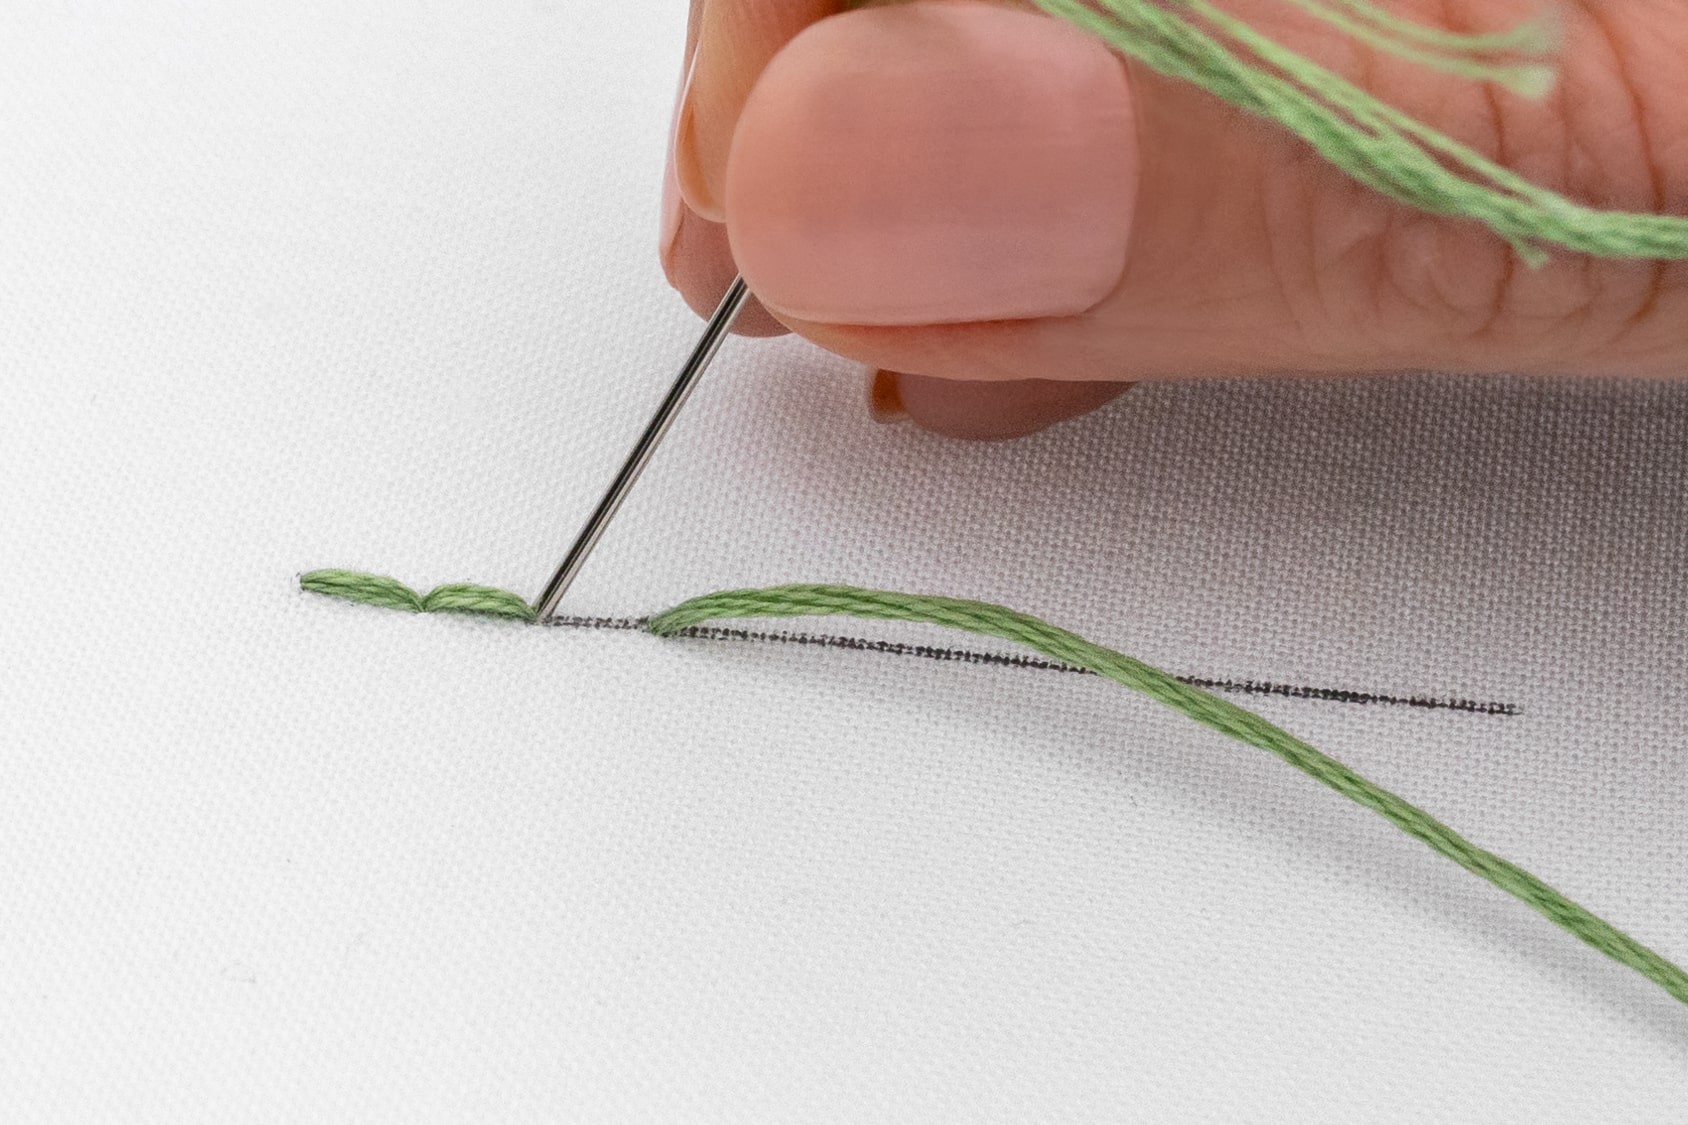 A needle is brought down to create a third stitch,